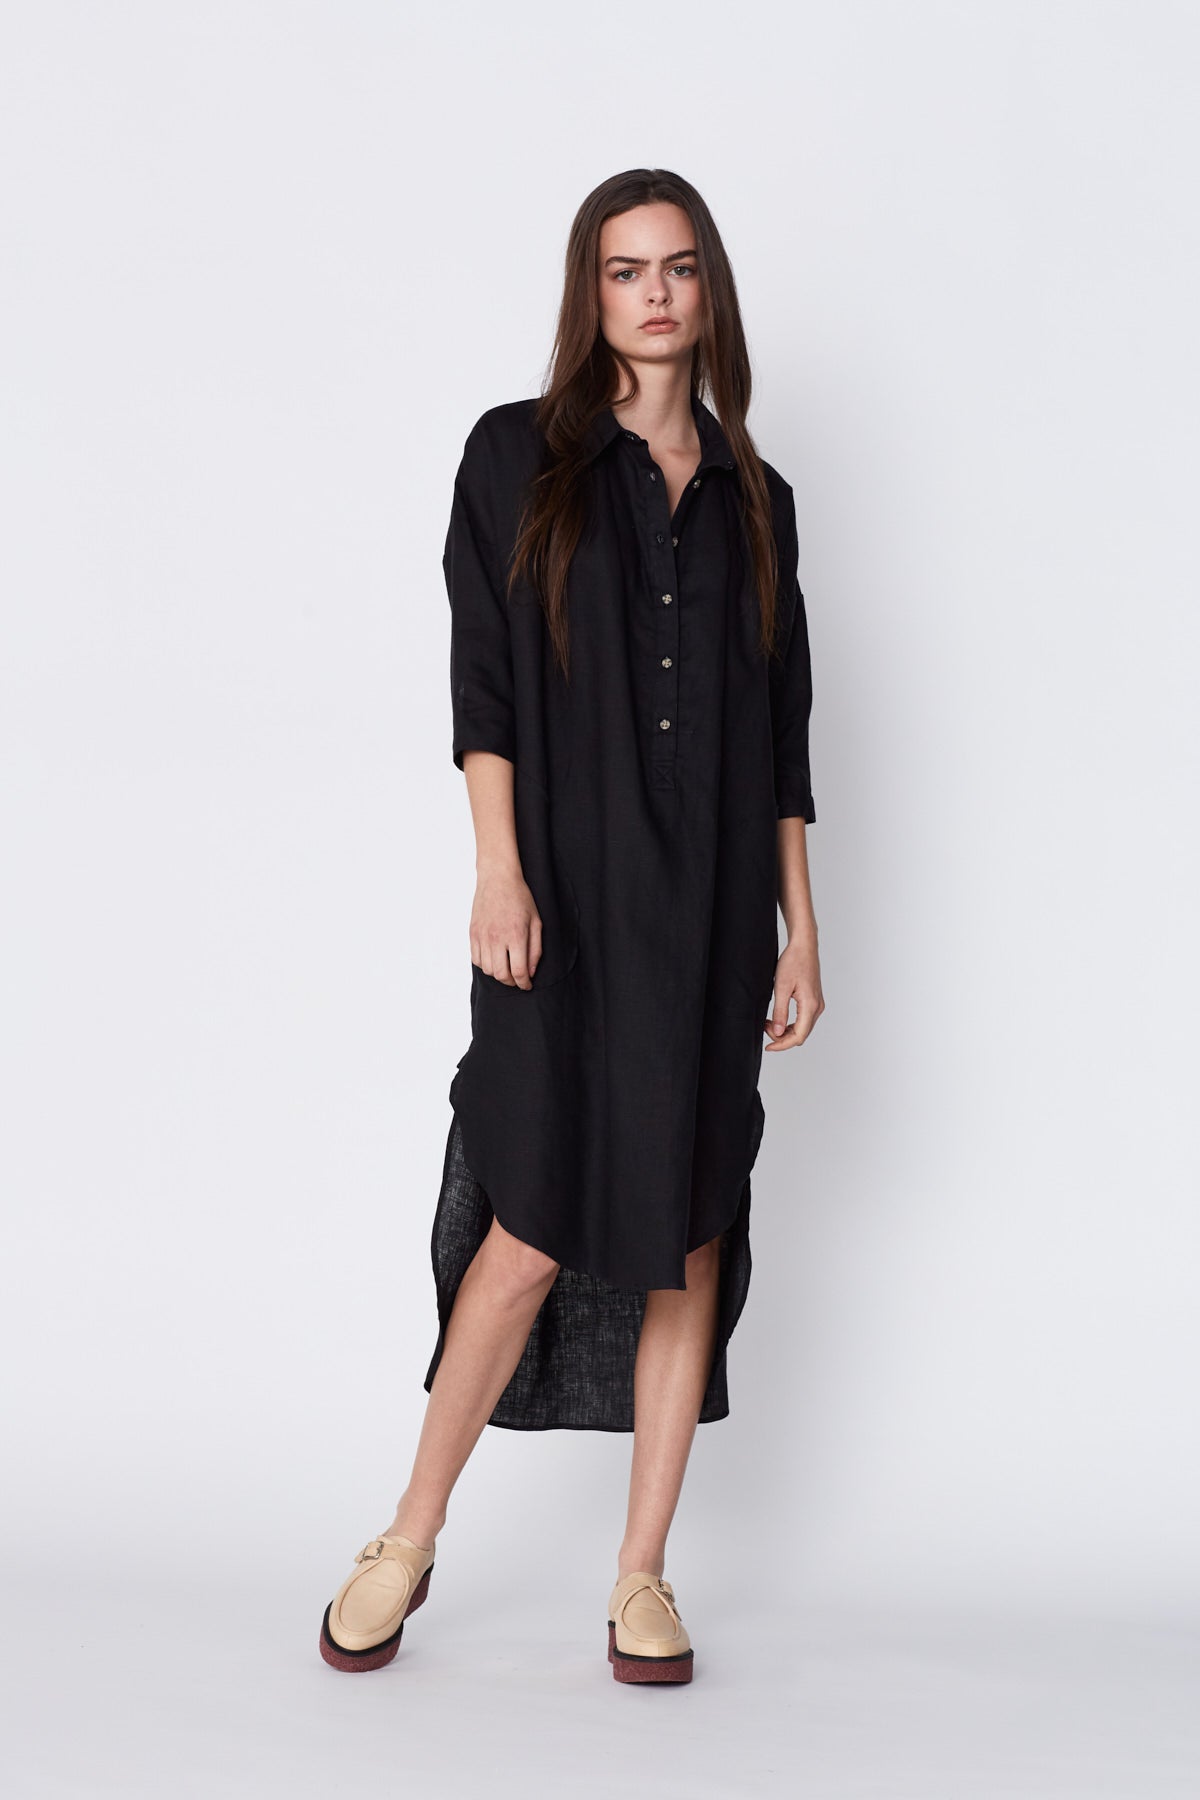 Leah Linen Popover Dress in Black. Made in Atlanta, ethically and sustainably, by slow fashion designer Megan Huntz. 